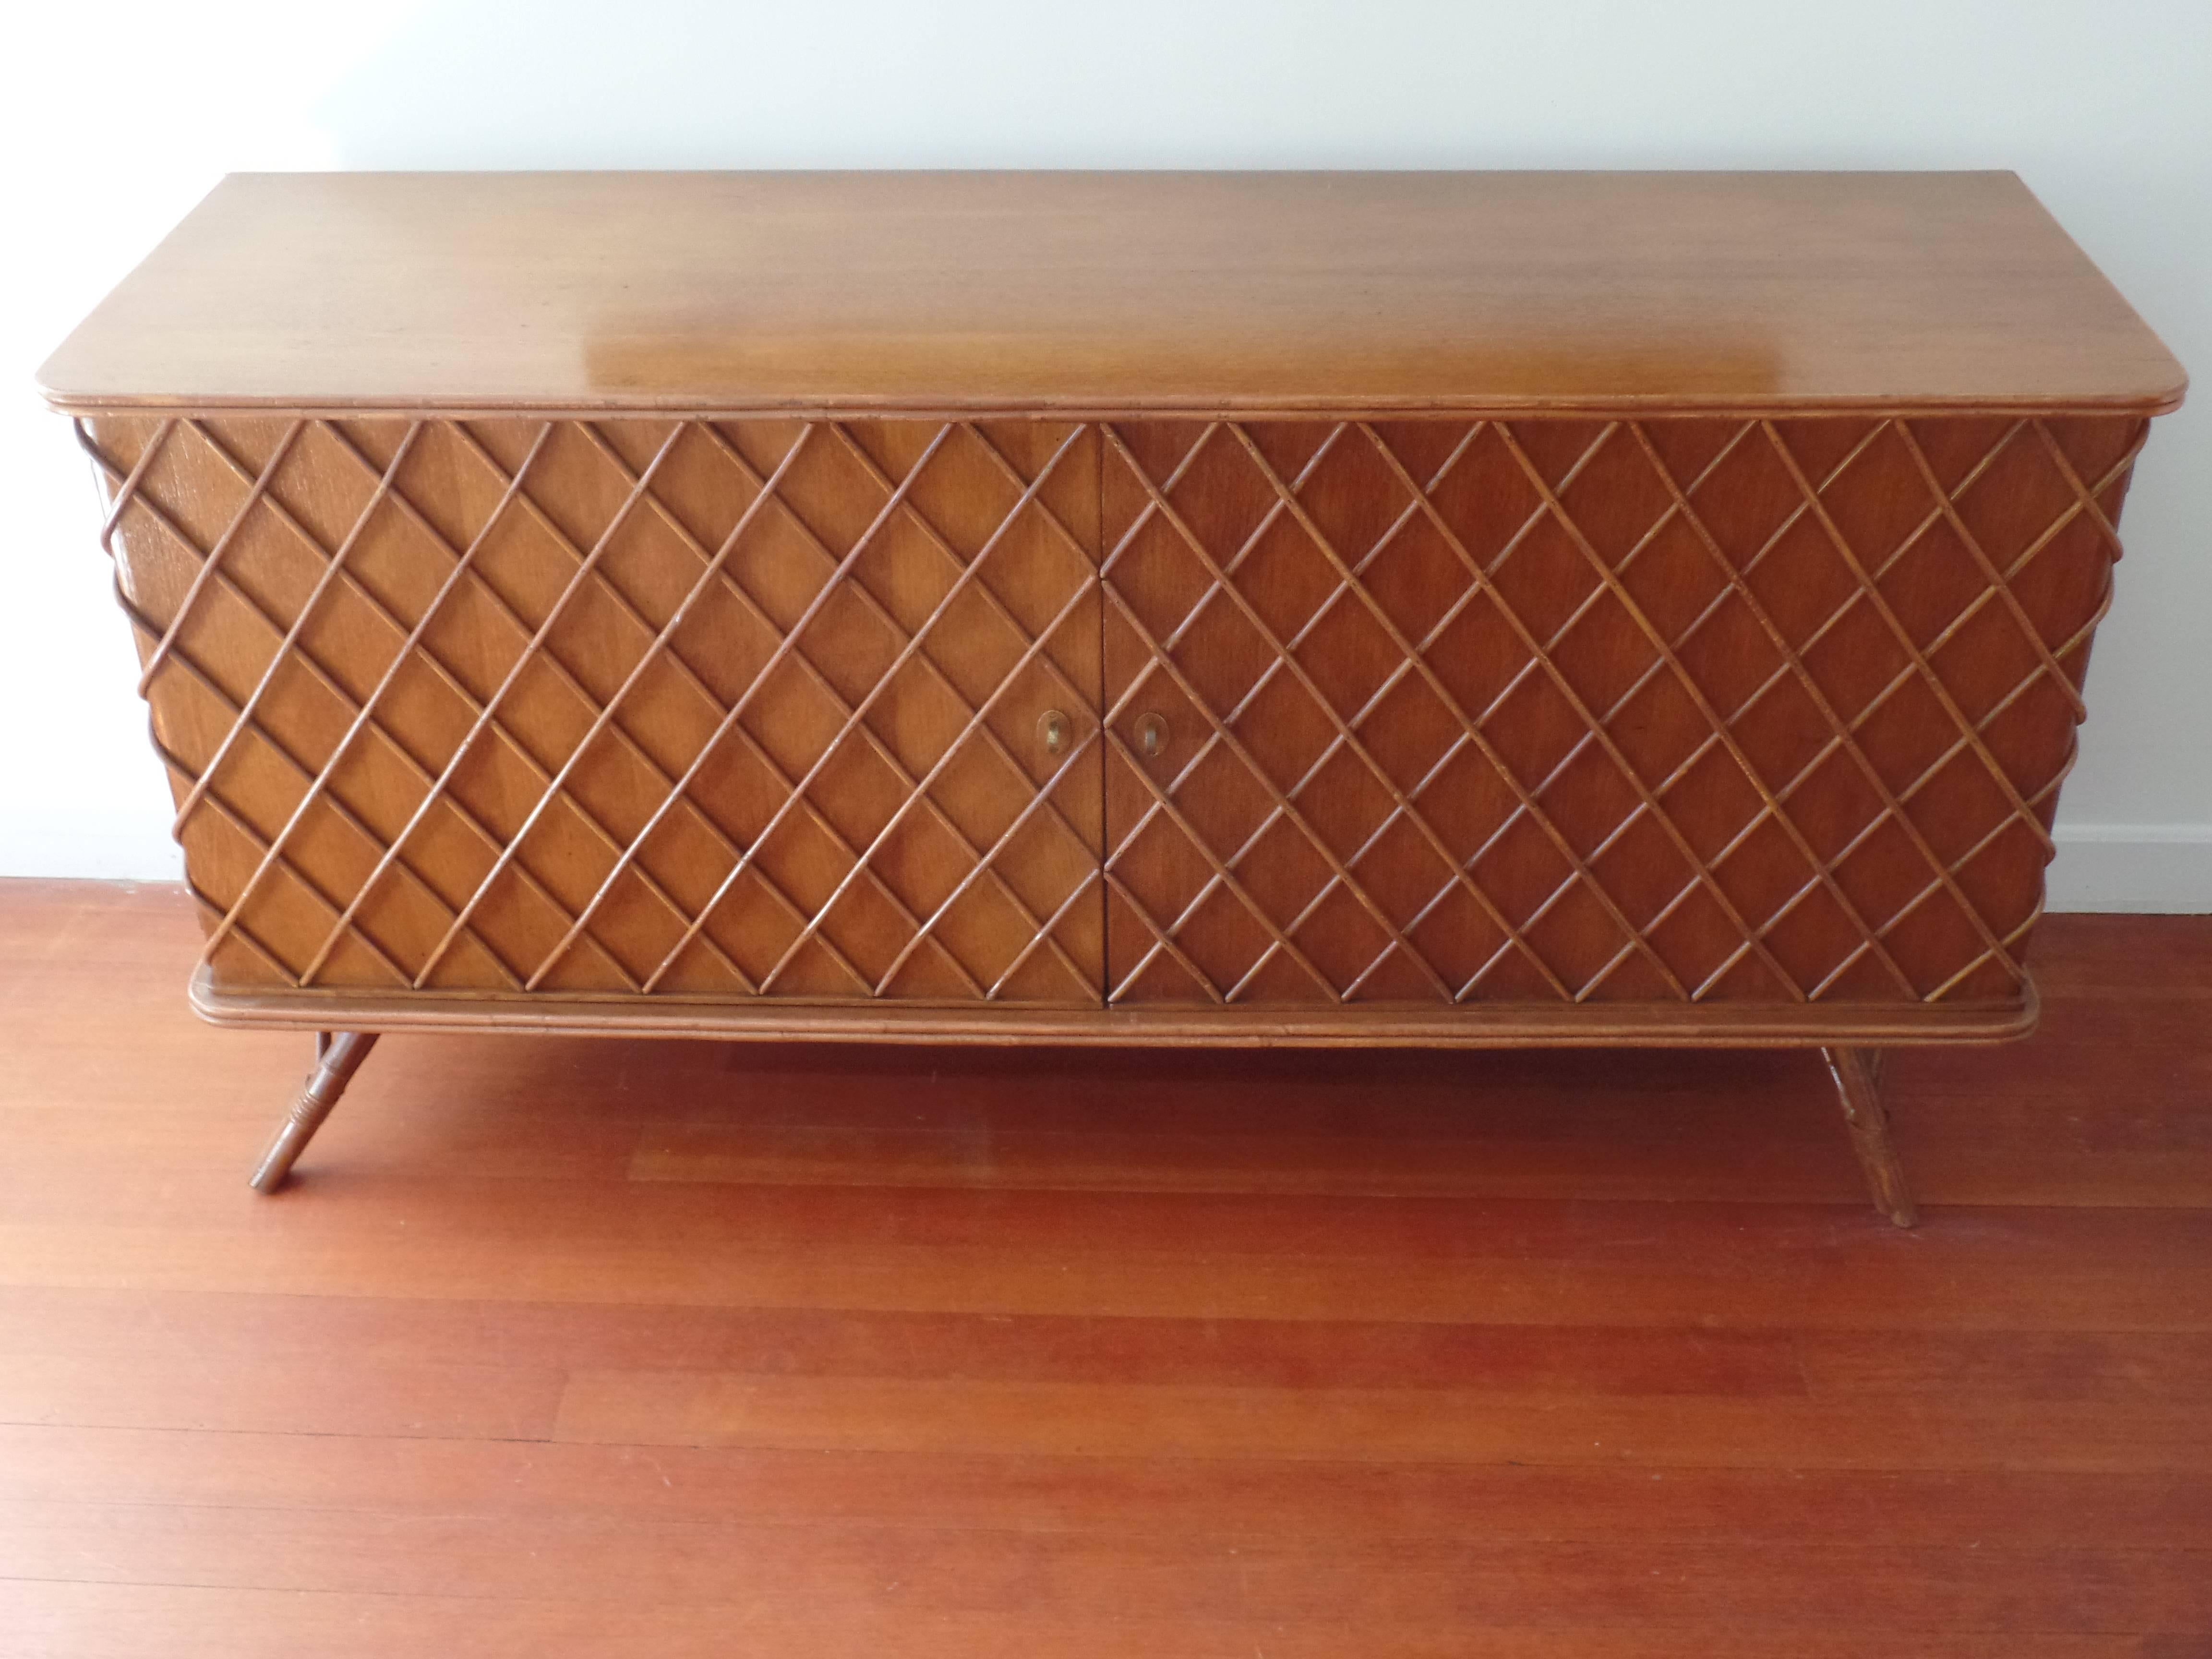 A Rare and Elegant French Mid-Century Modern Neoclassical sideboard, credenza or cabinet circa 1940-1950 attributed to Andre Arbus. The sideboard is a masterpiece of form and materials. It combines modern simplicity and purity with neoclassical